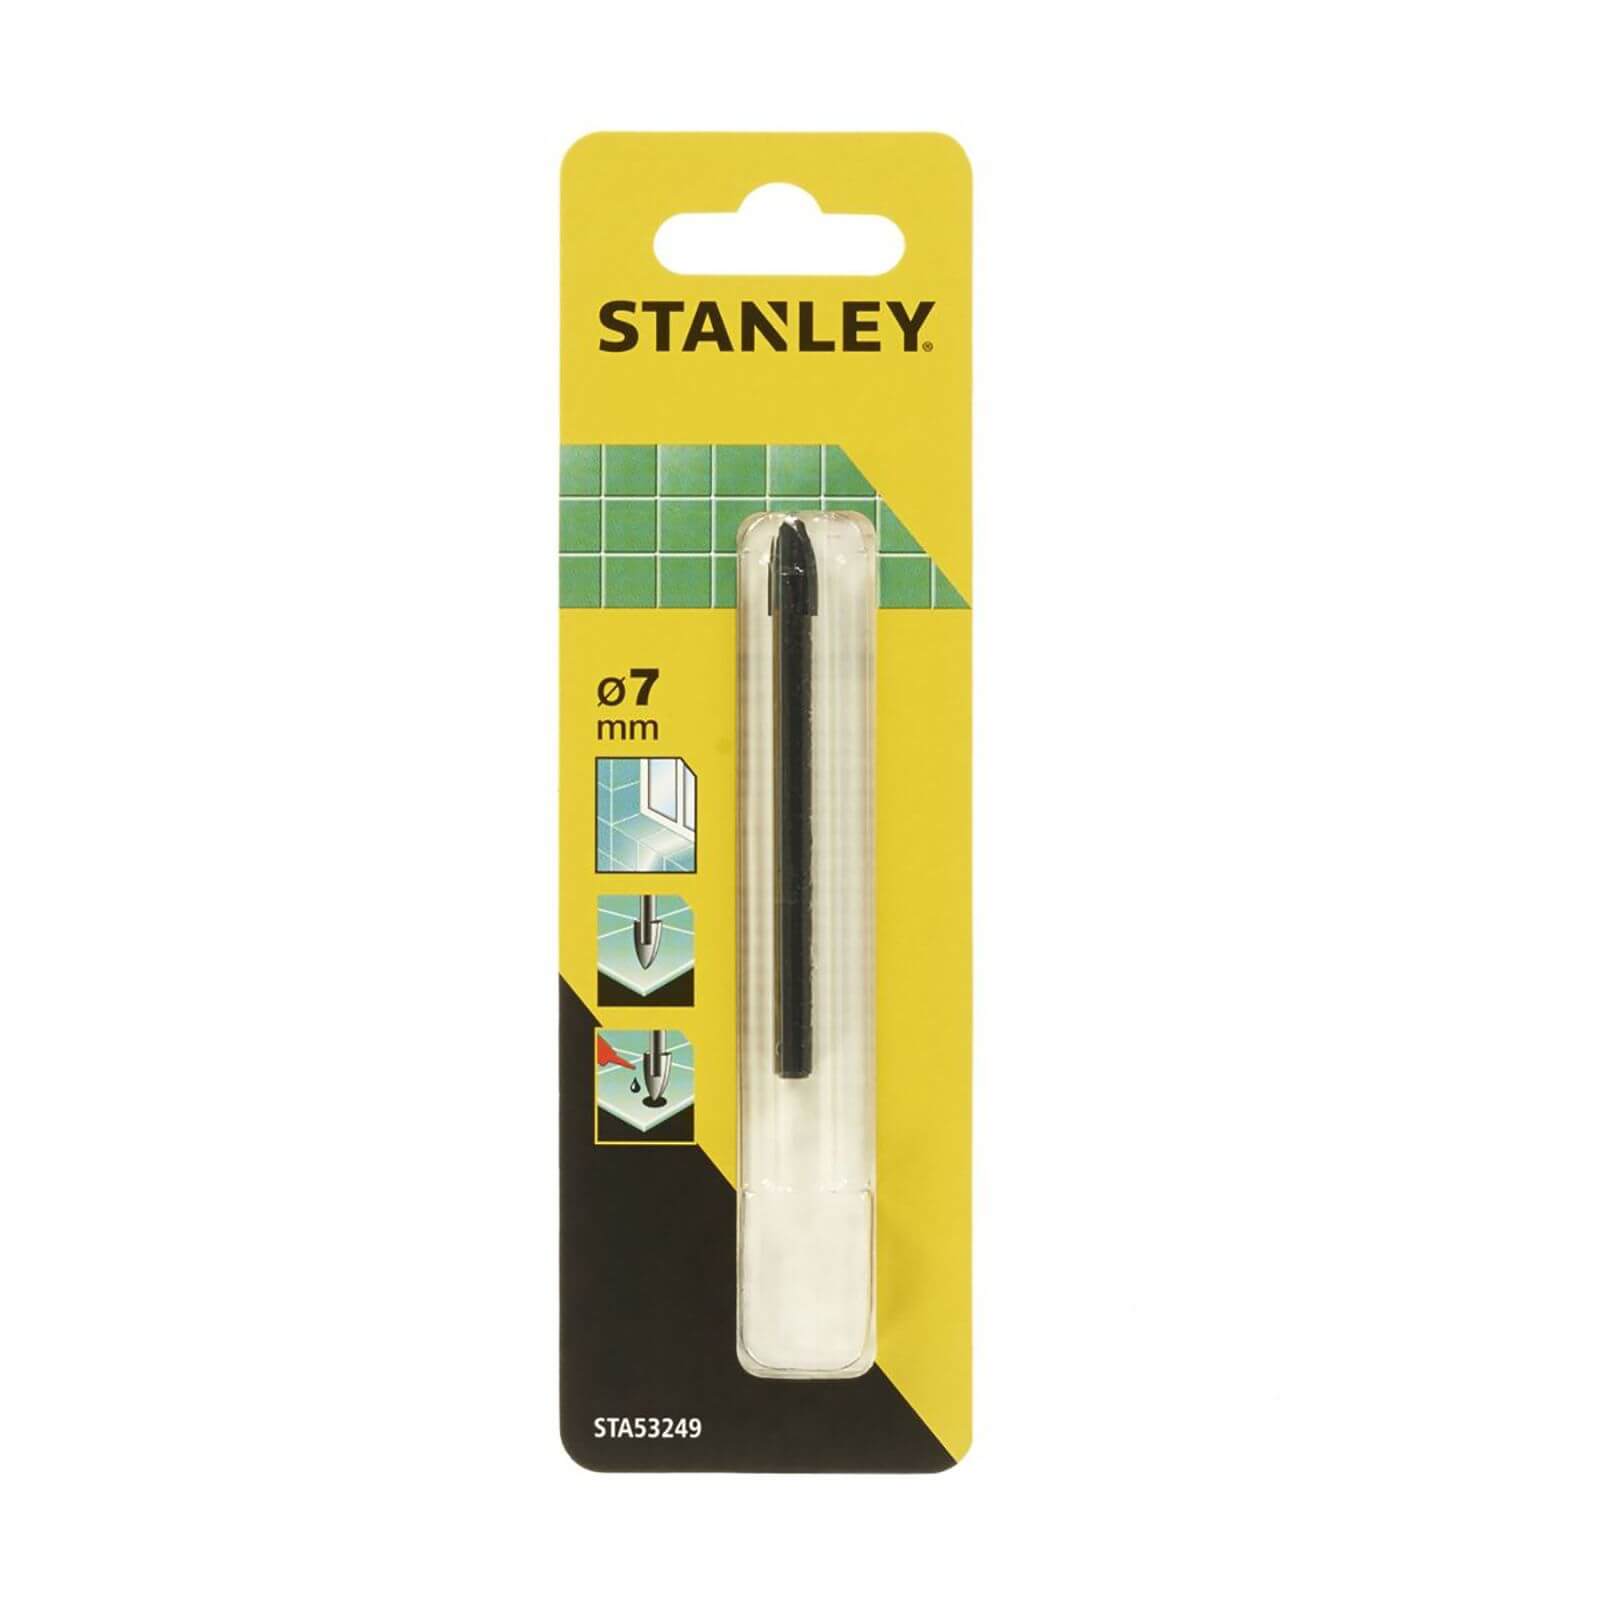 Photo of Stanley Drill Bit Tile & Glass 7mm - Sta53249-qz